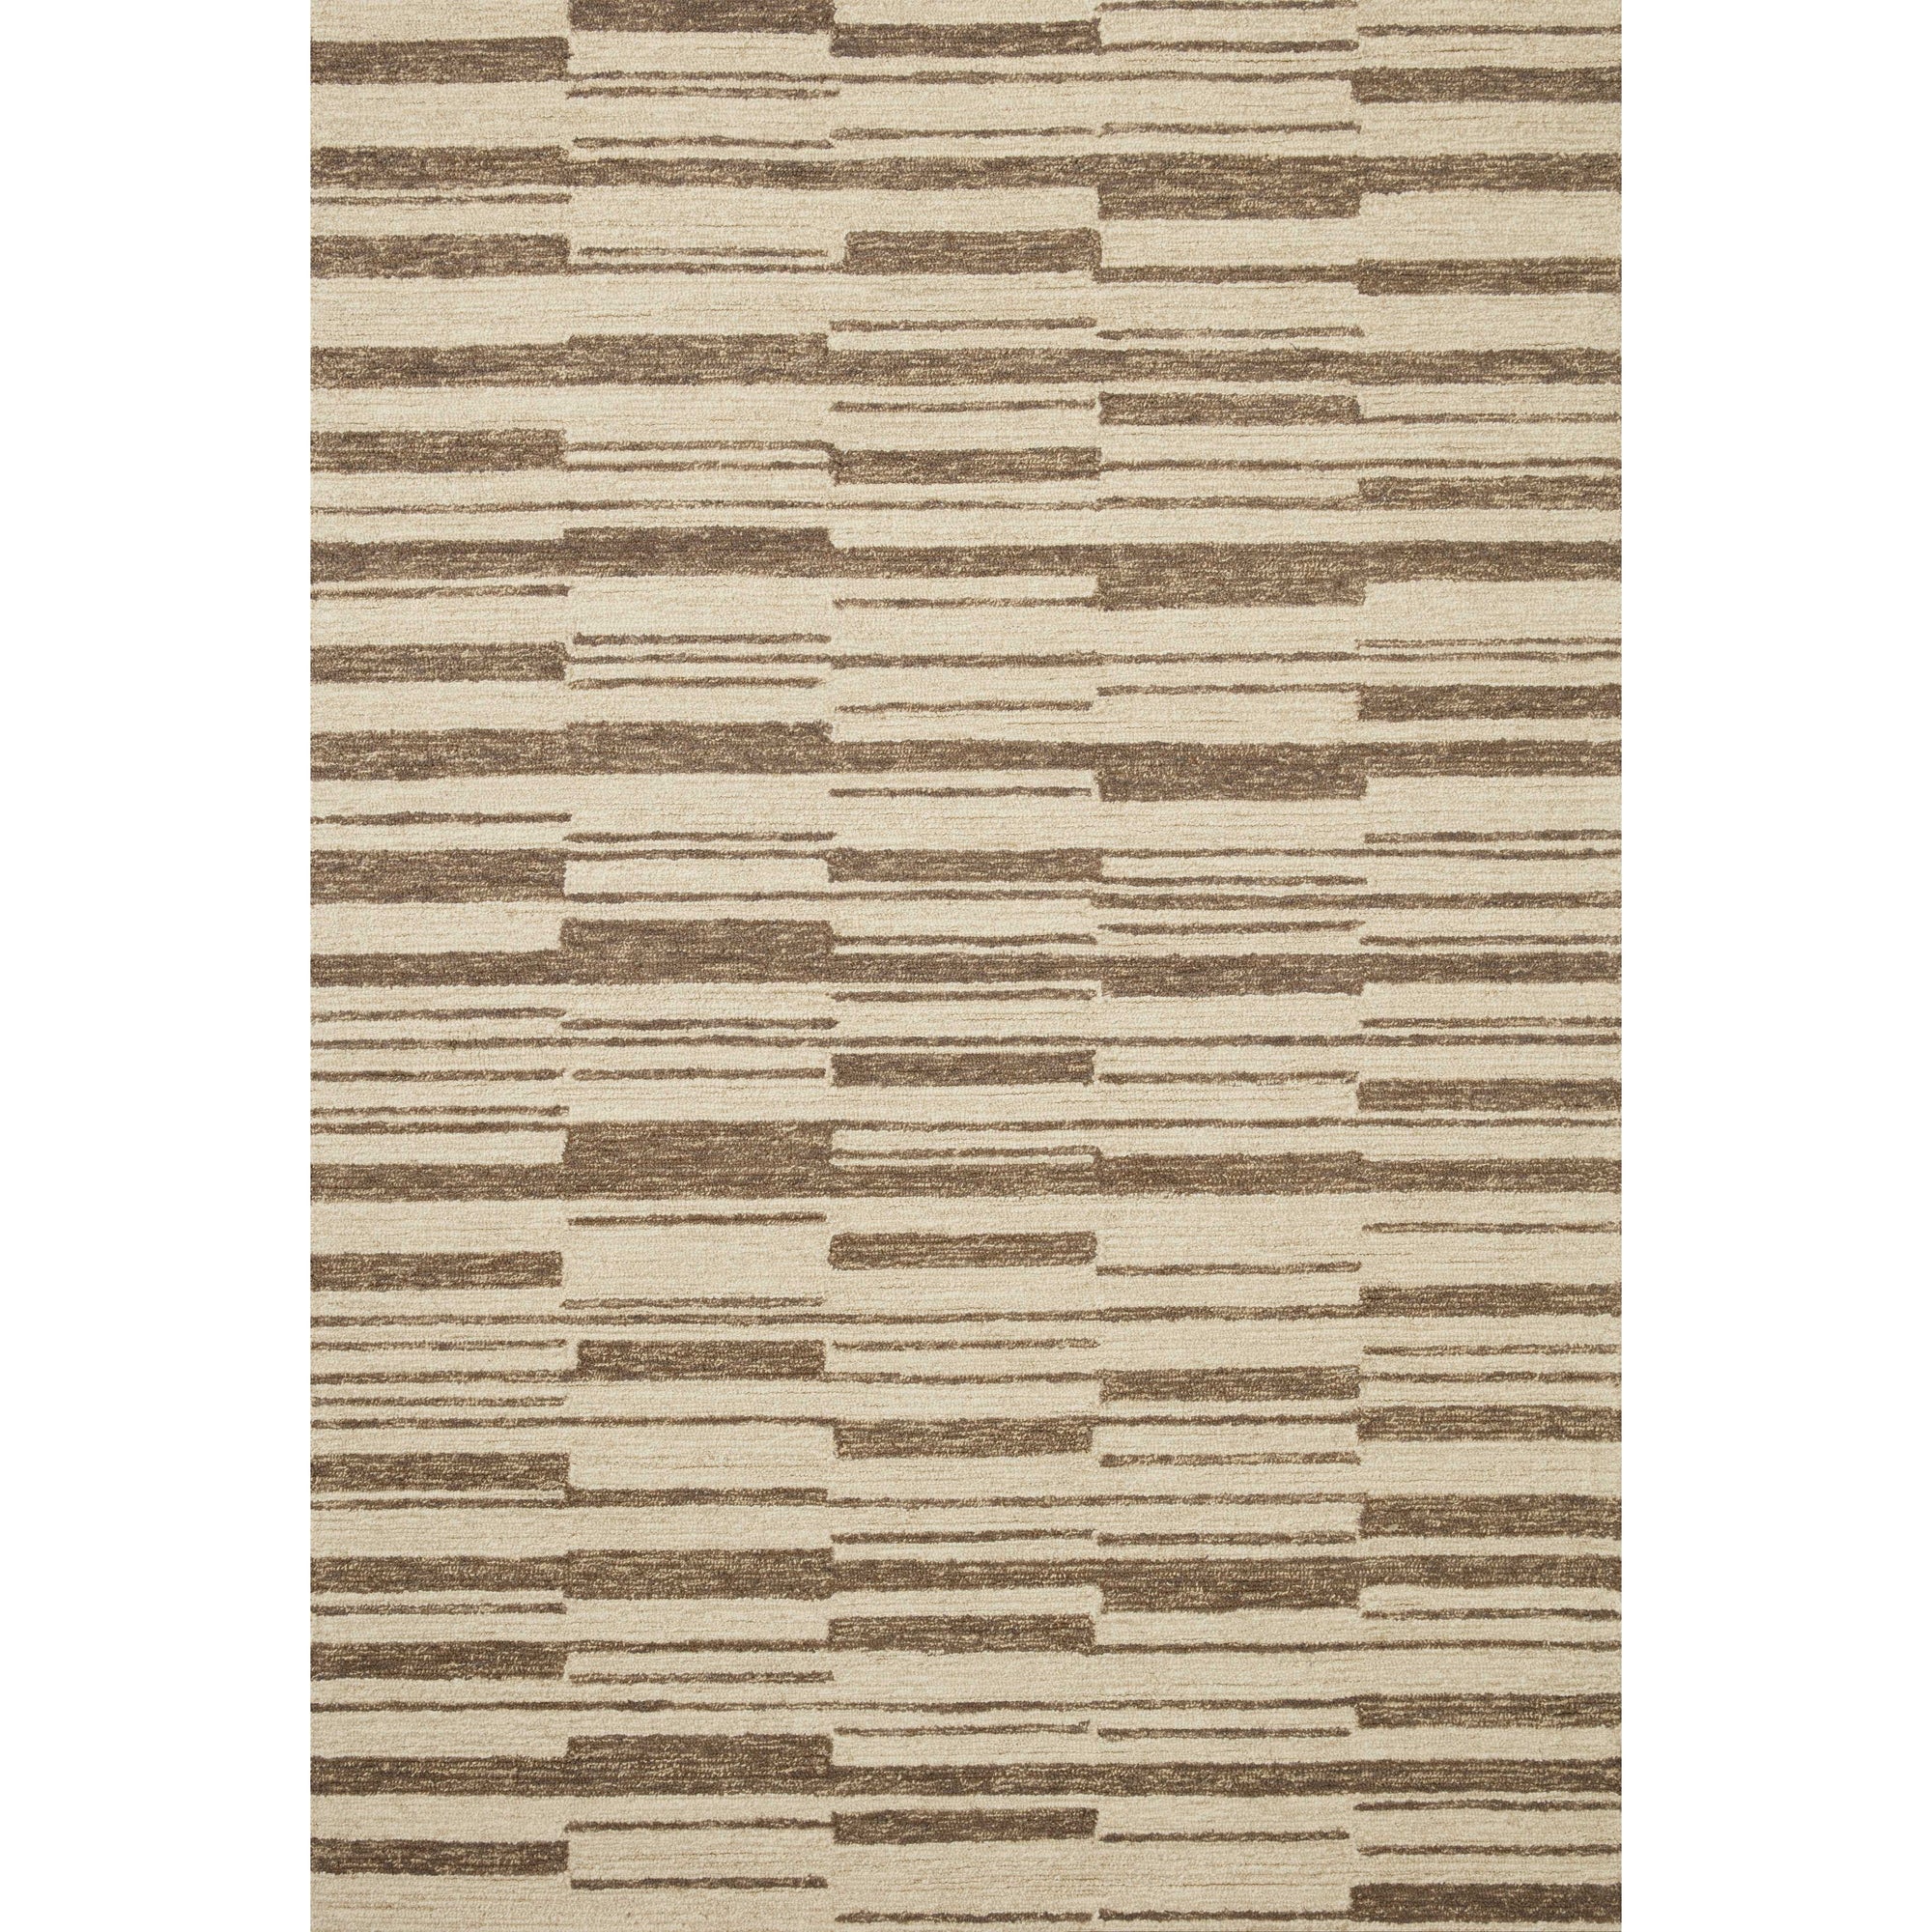 Rugs by Roo | Loloi Chris Loves Julia Tobacco Area Rug-POLLPOL-04BETO160S